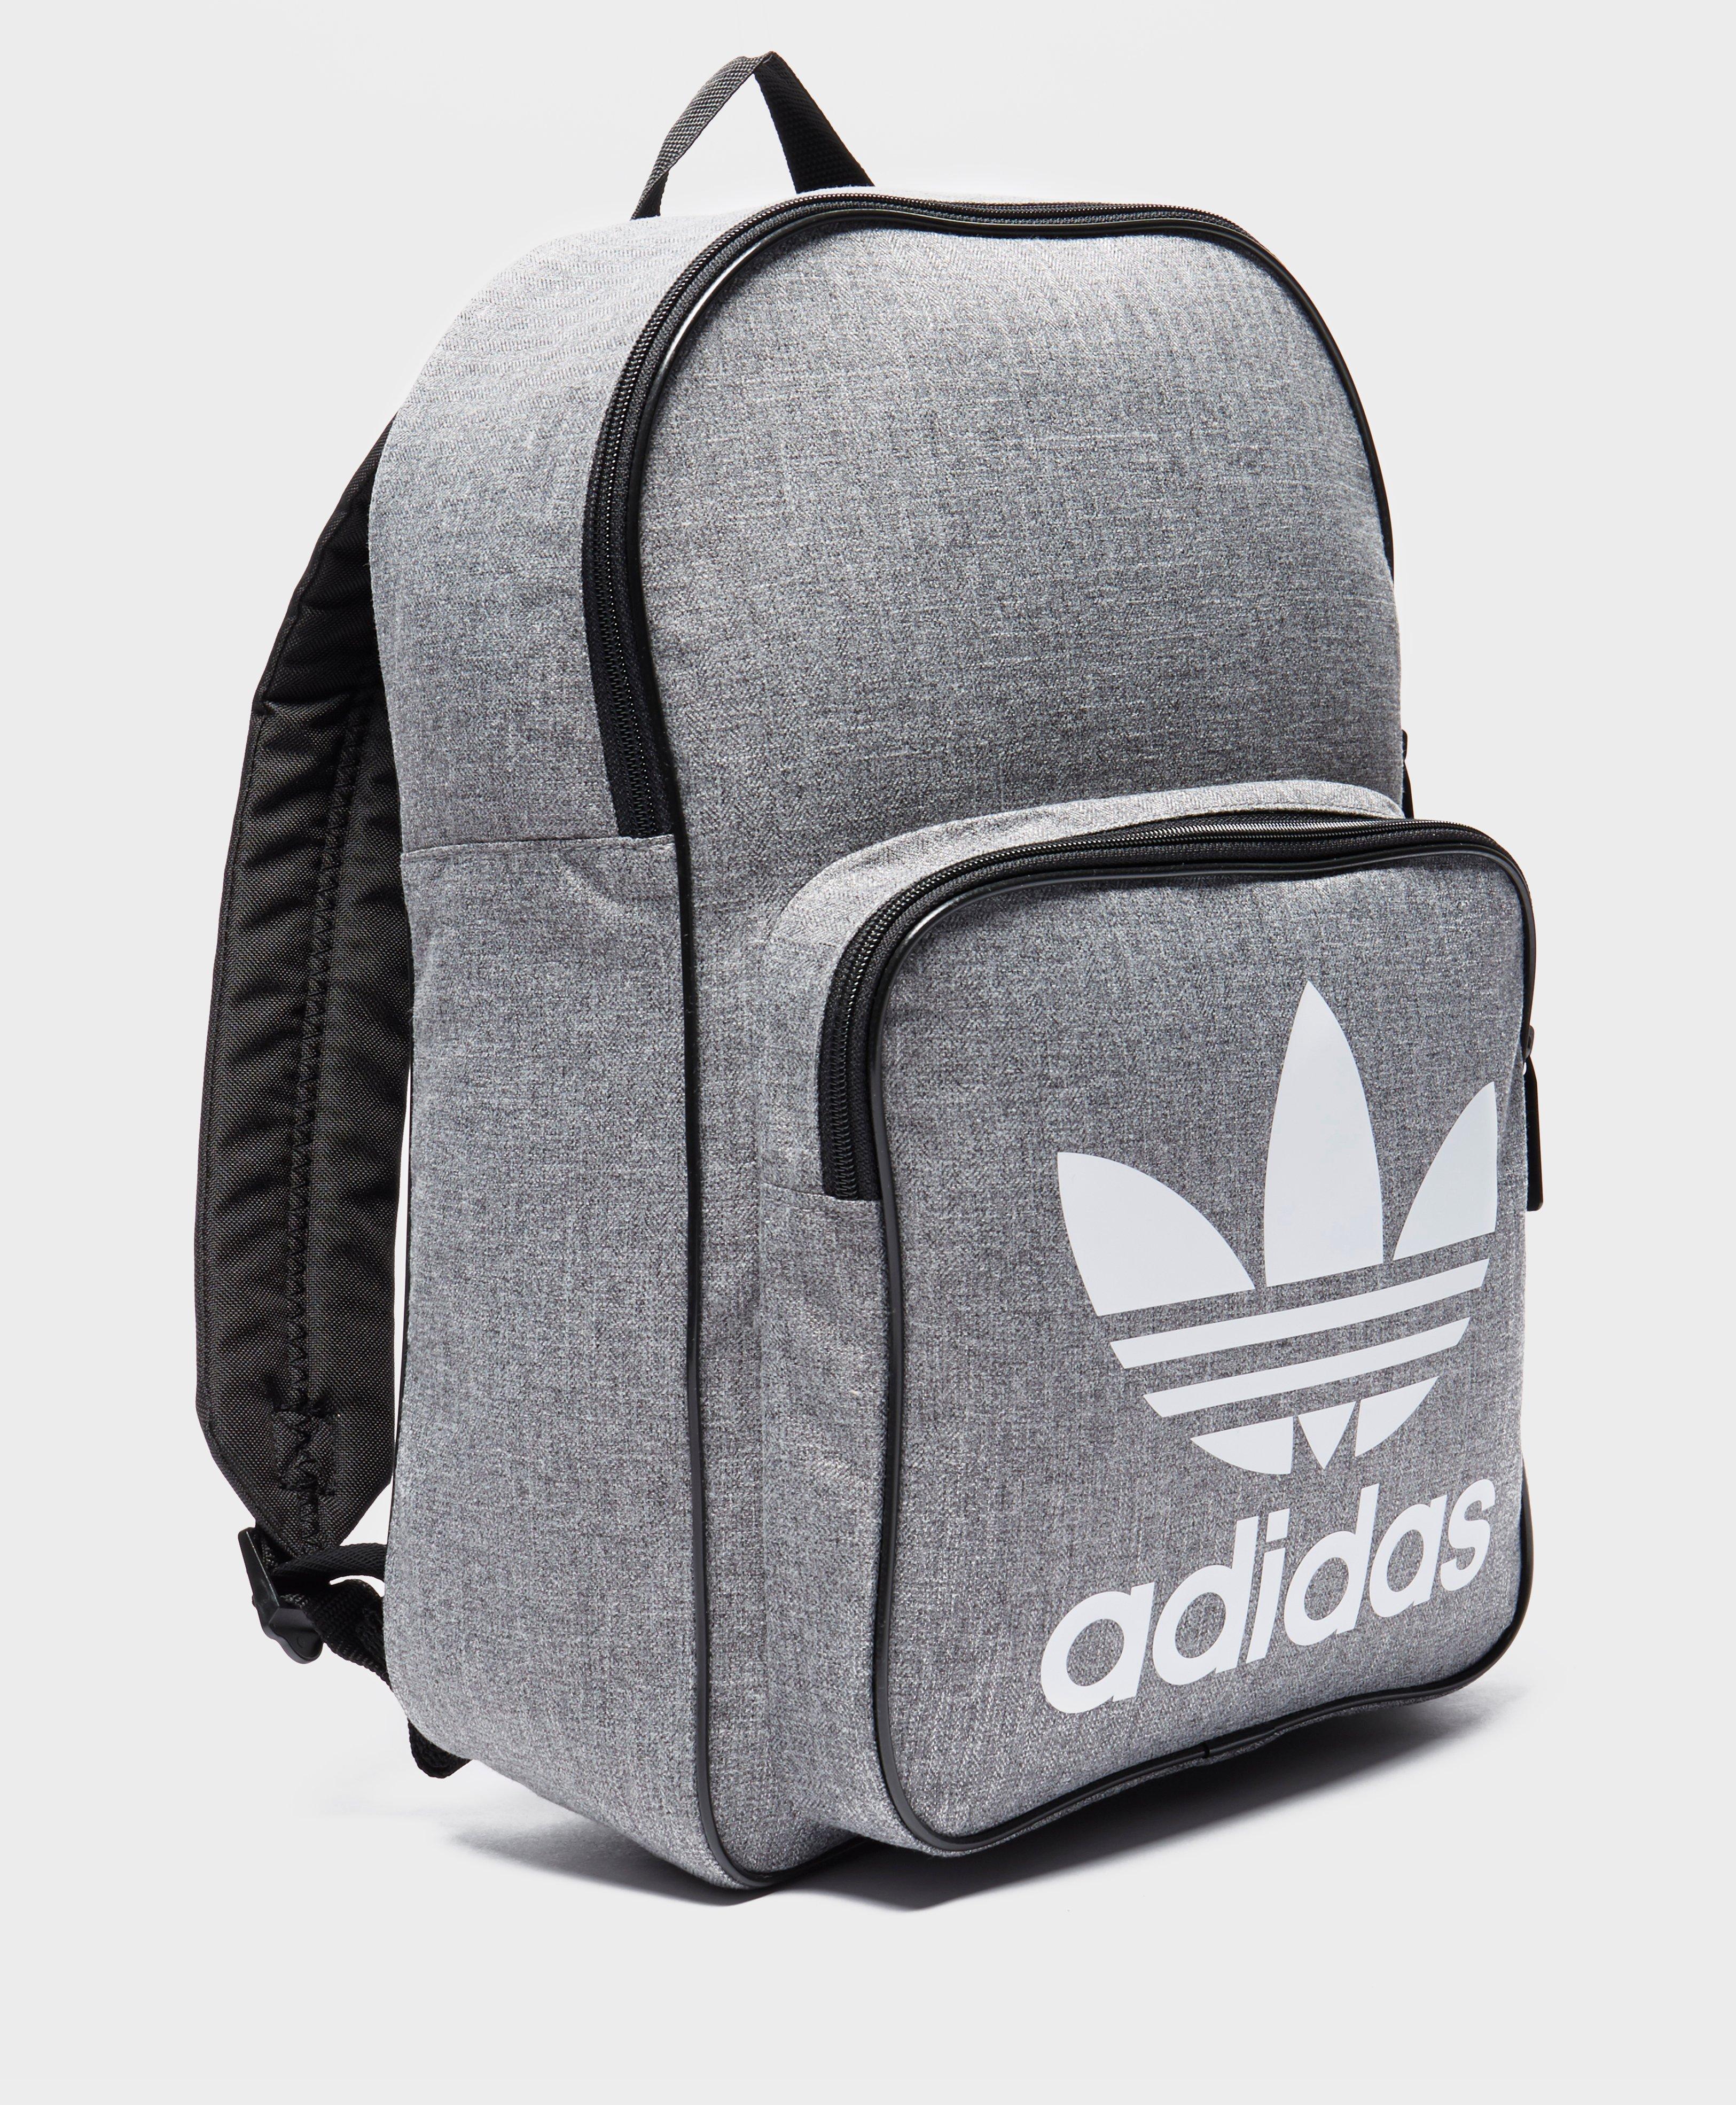 adidas Originals Synthetic Classic Trefoil Backpack in Grey for Men - Lyst